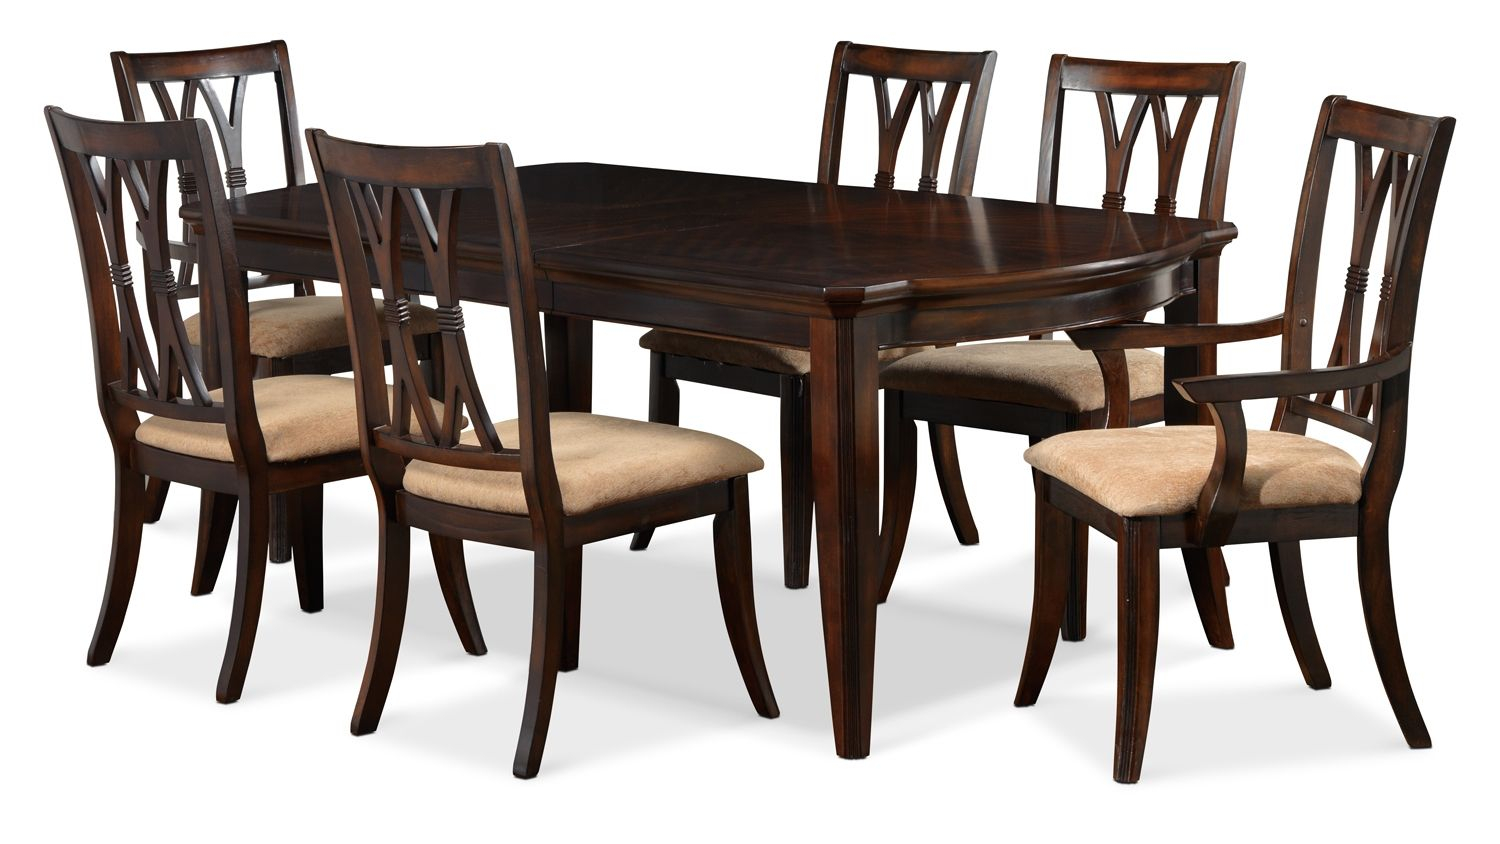 King George Dining Room 7 Pc Dining Set Leons Dining in dimensions 1500 X 844